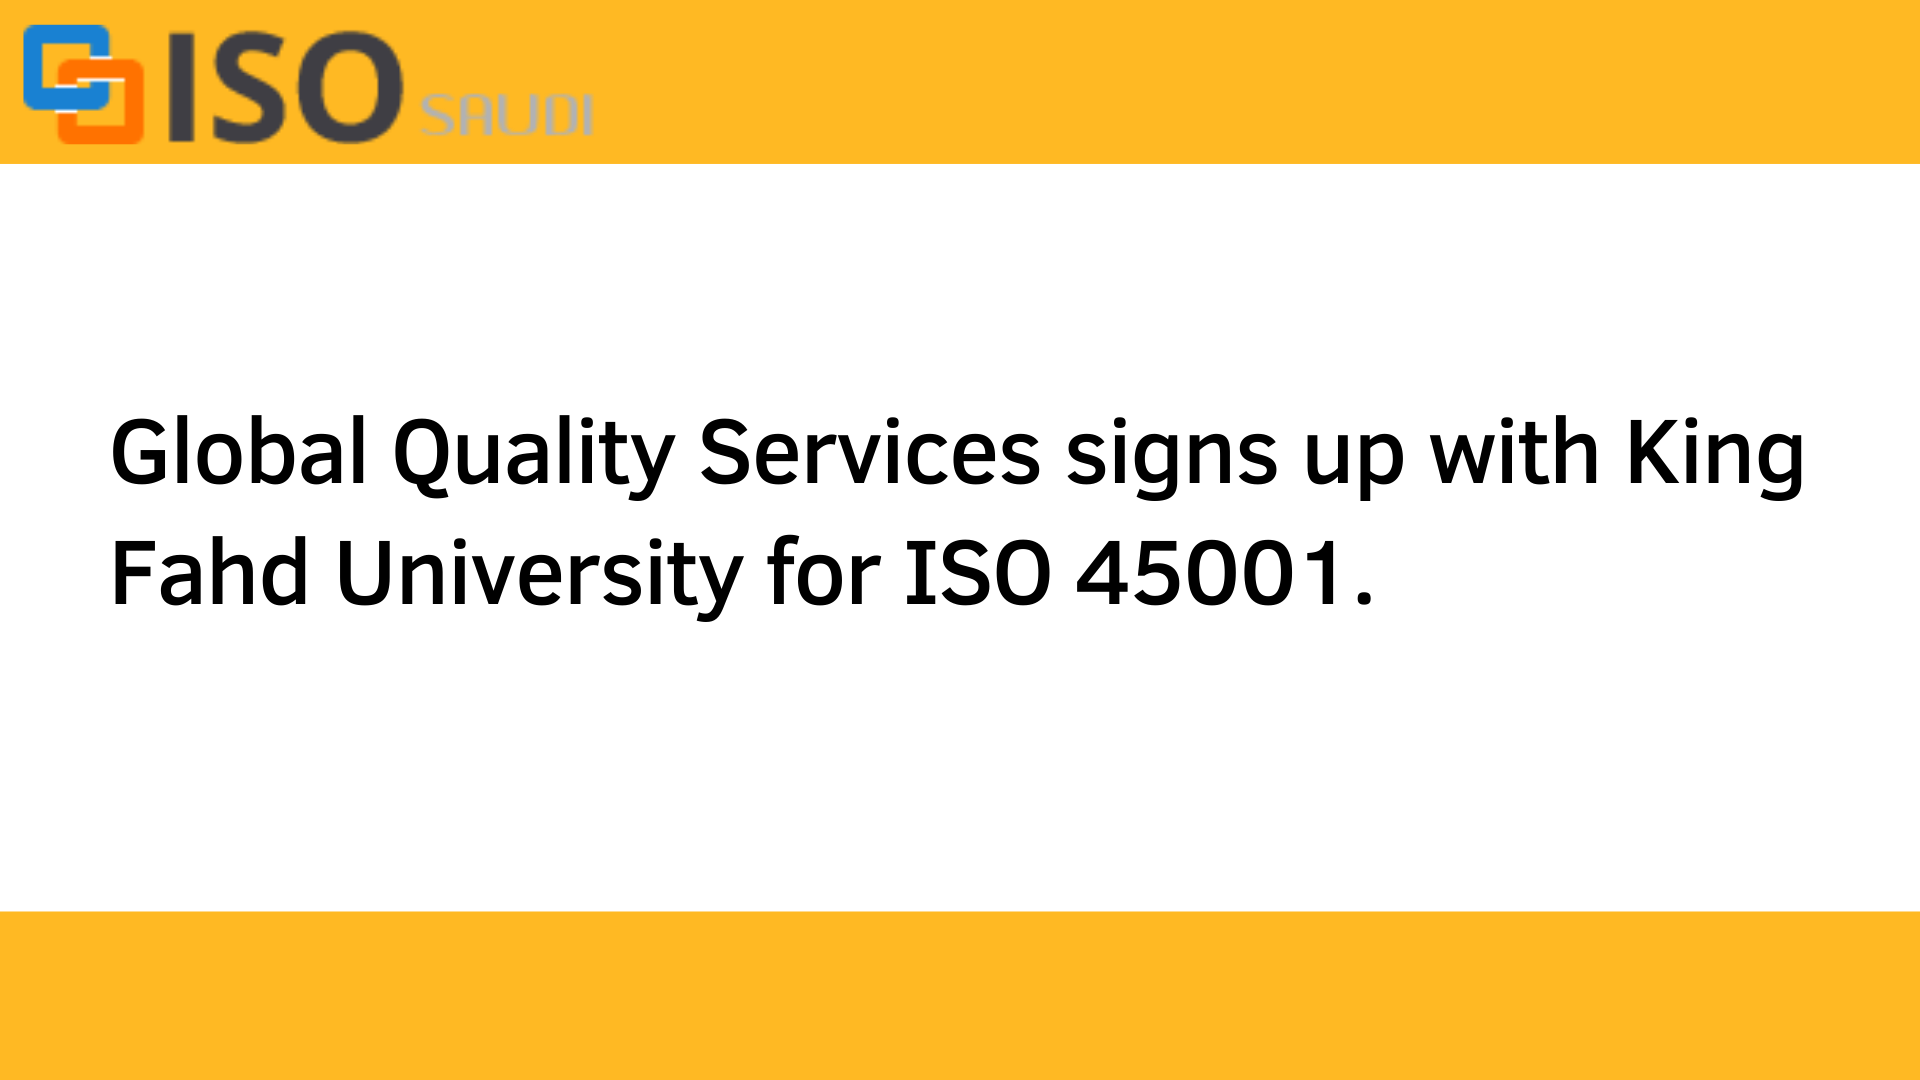 Global quality services signs up with King Fahd University for ISO 45001.